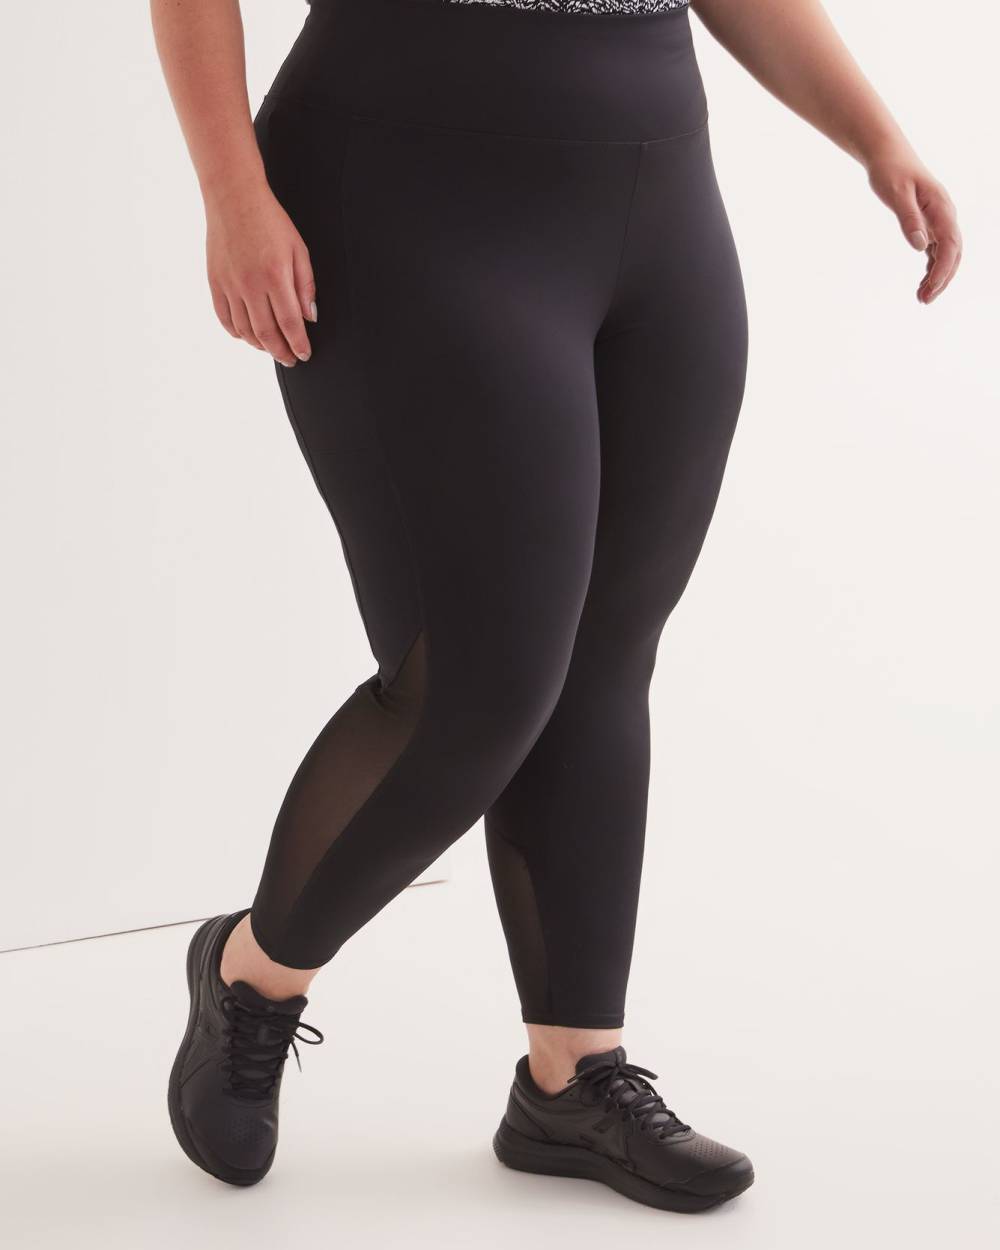 Responsible, High-Waisted Legging with Side Pockets and Mesh Inserts -  Active Zone